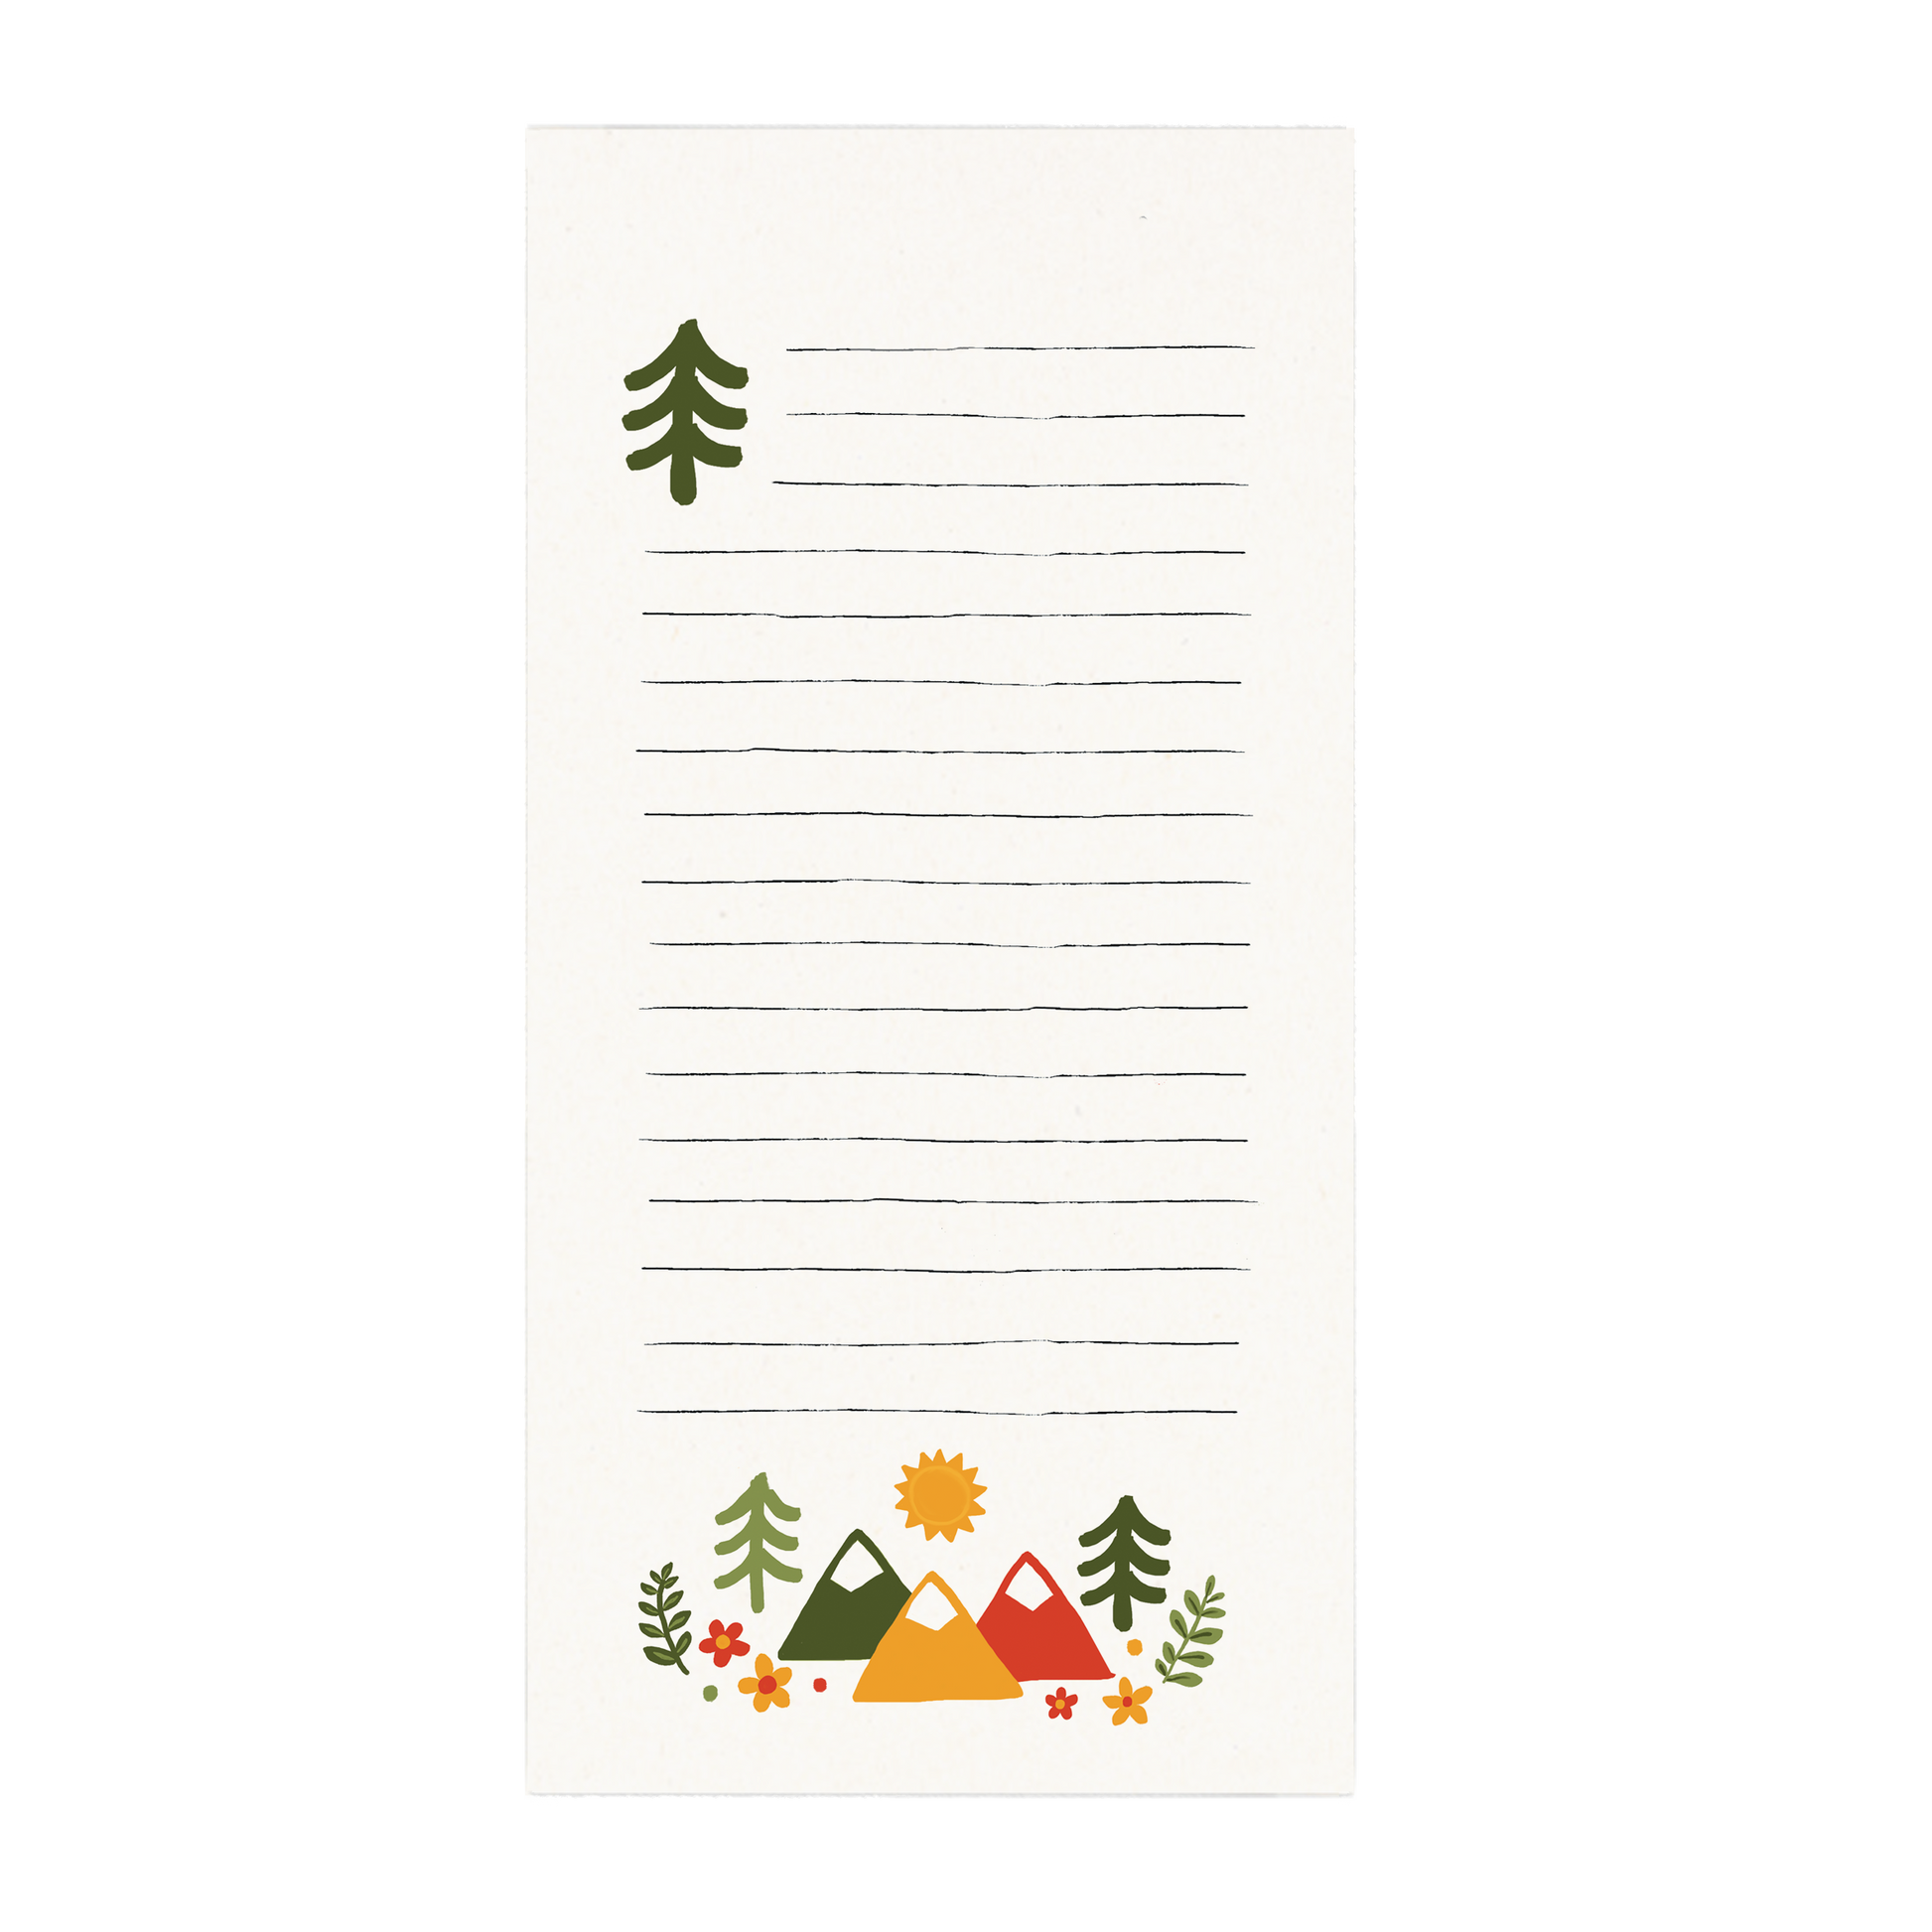 A mountain notepad from the Pencil Me In Stationery Shop.